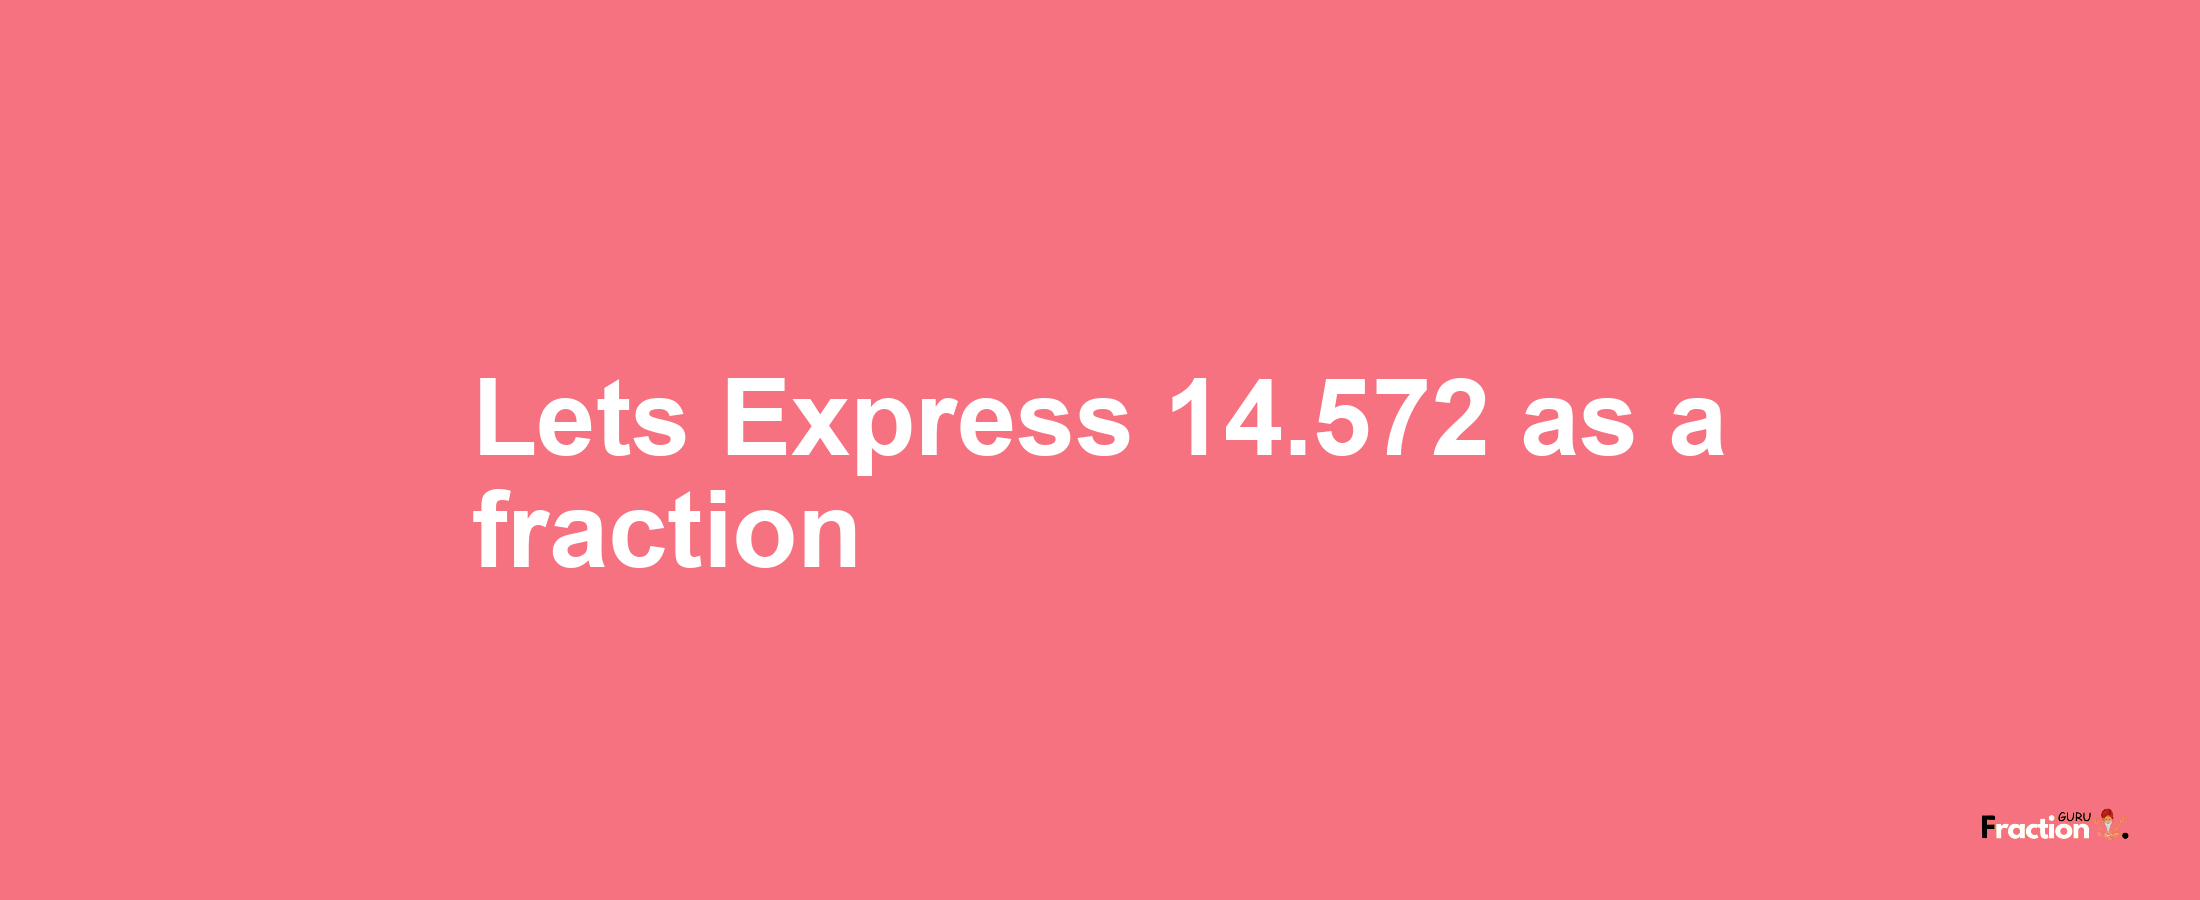 Lets Express 14.572 as afraction